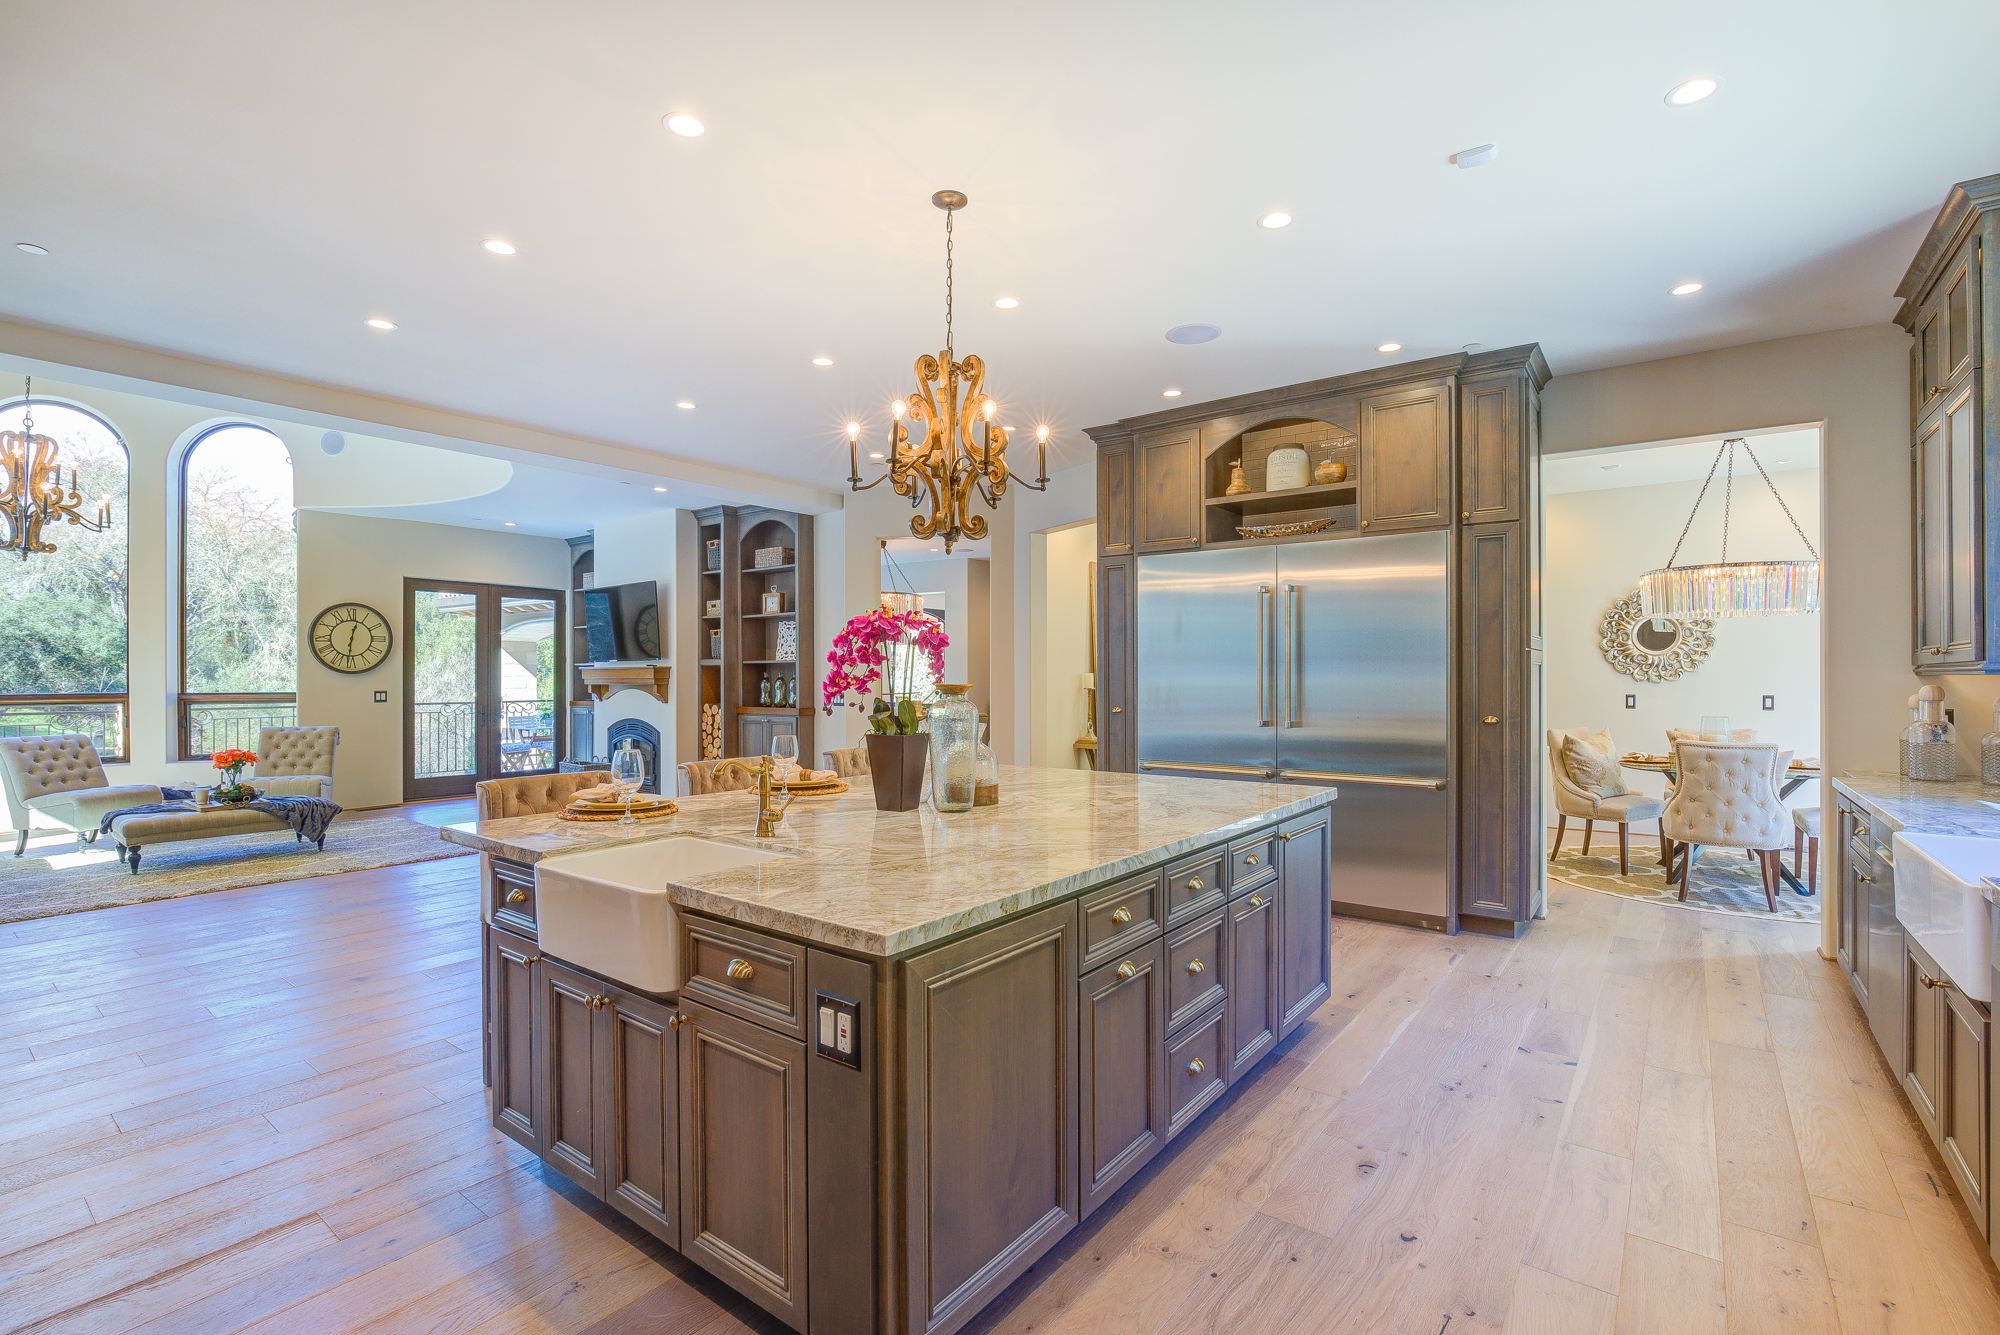  The full height kitchen cabinetry is custom made of all American hardwoods and plywood’s hand-stained to perfection and protected with a conversion varnish top coat. 